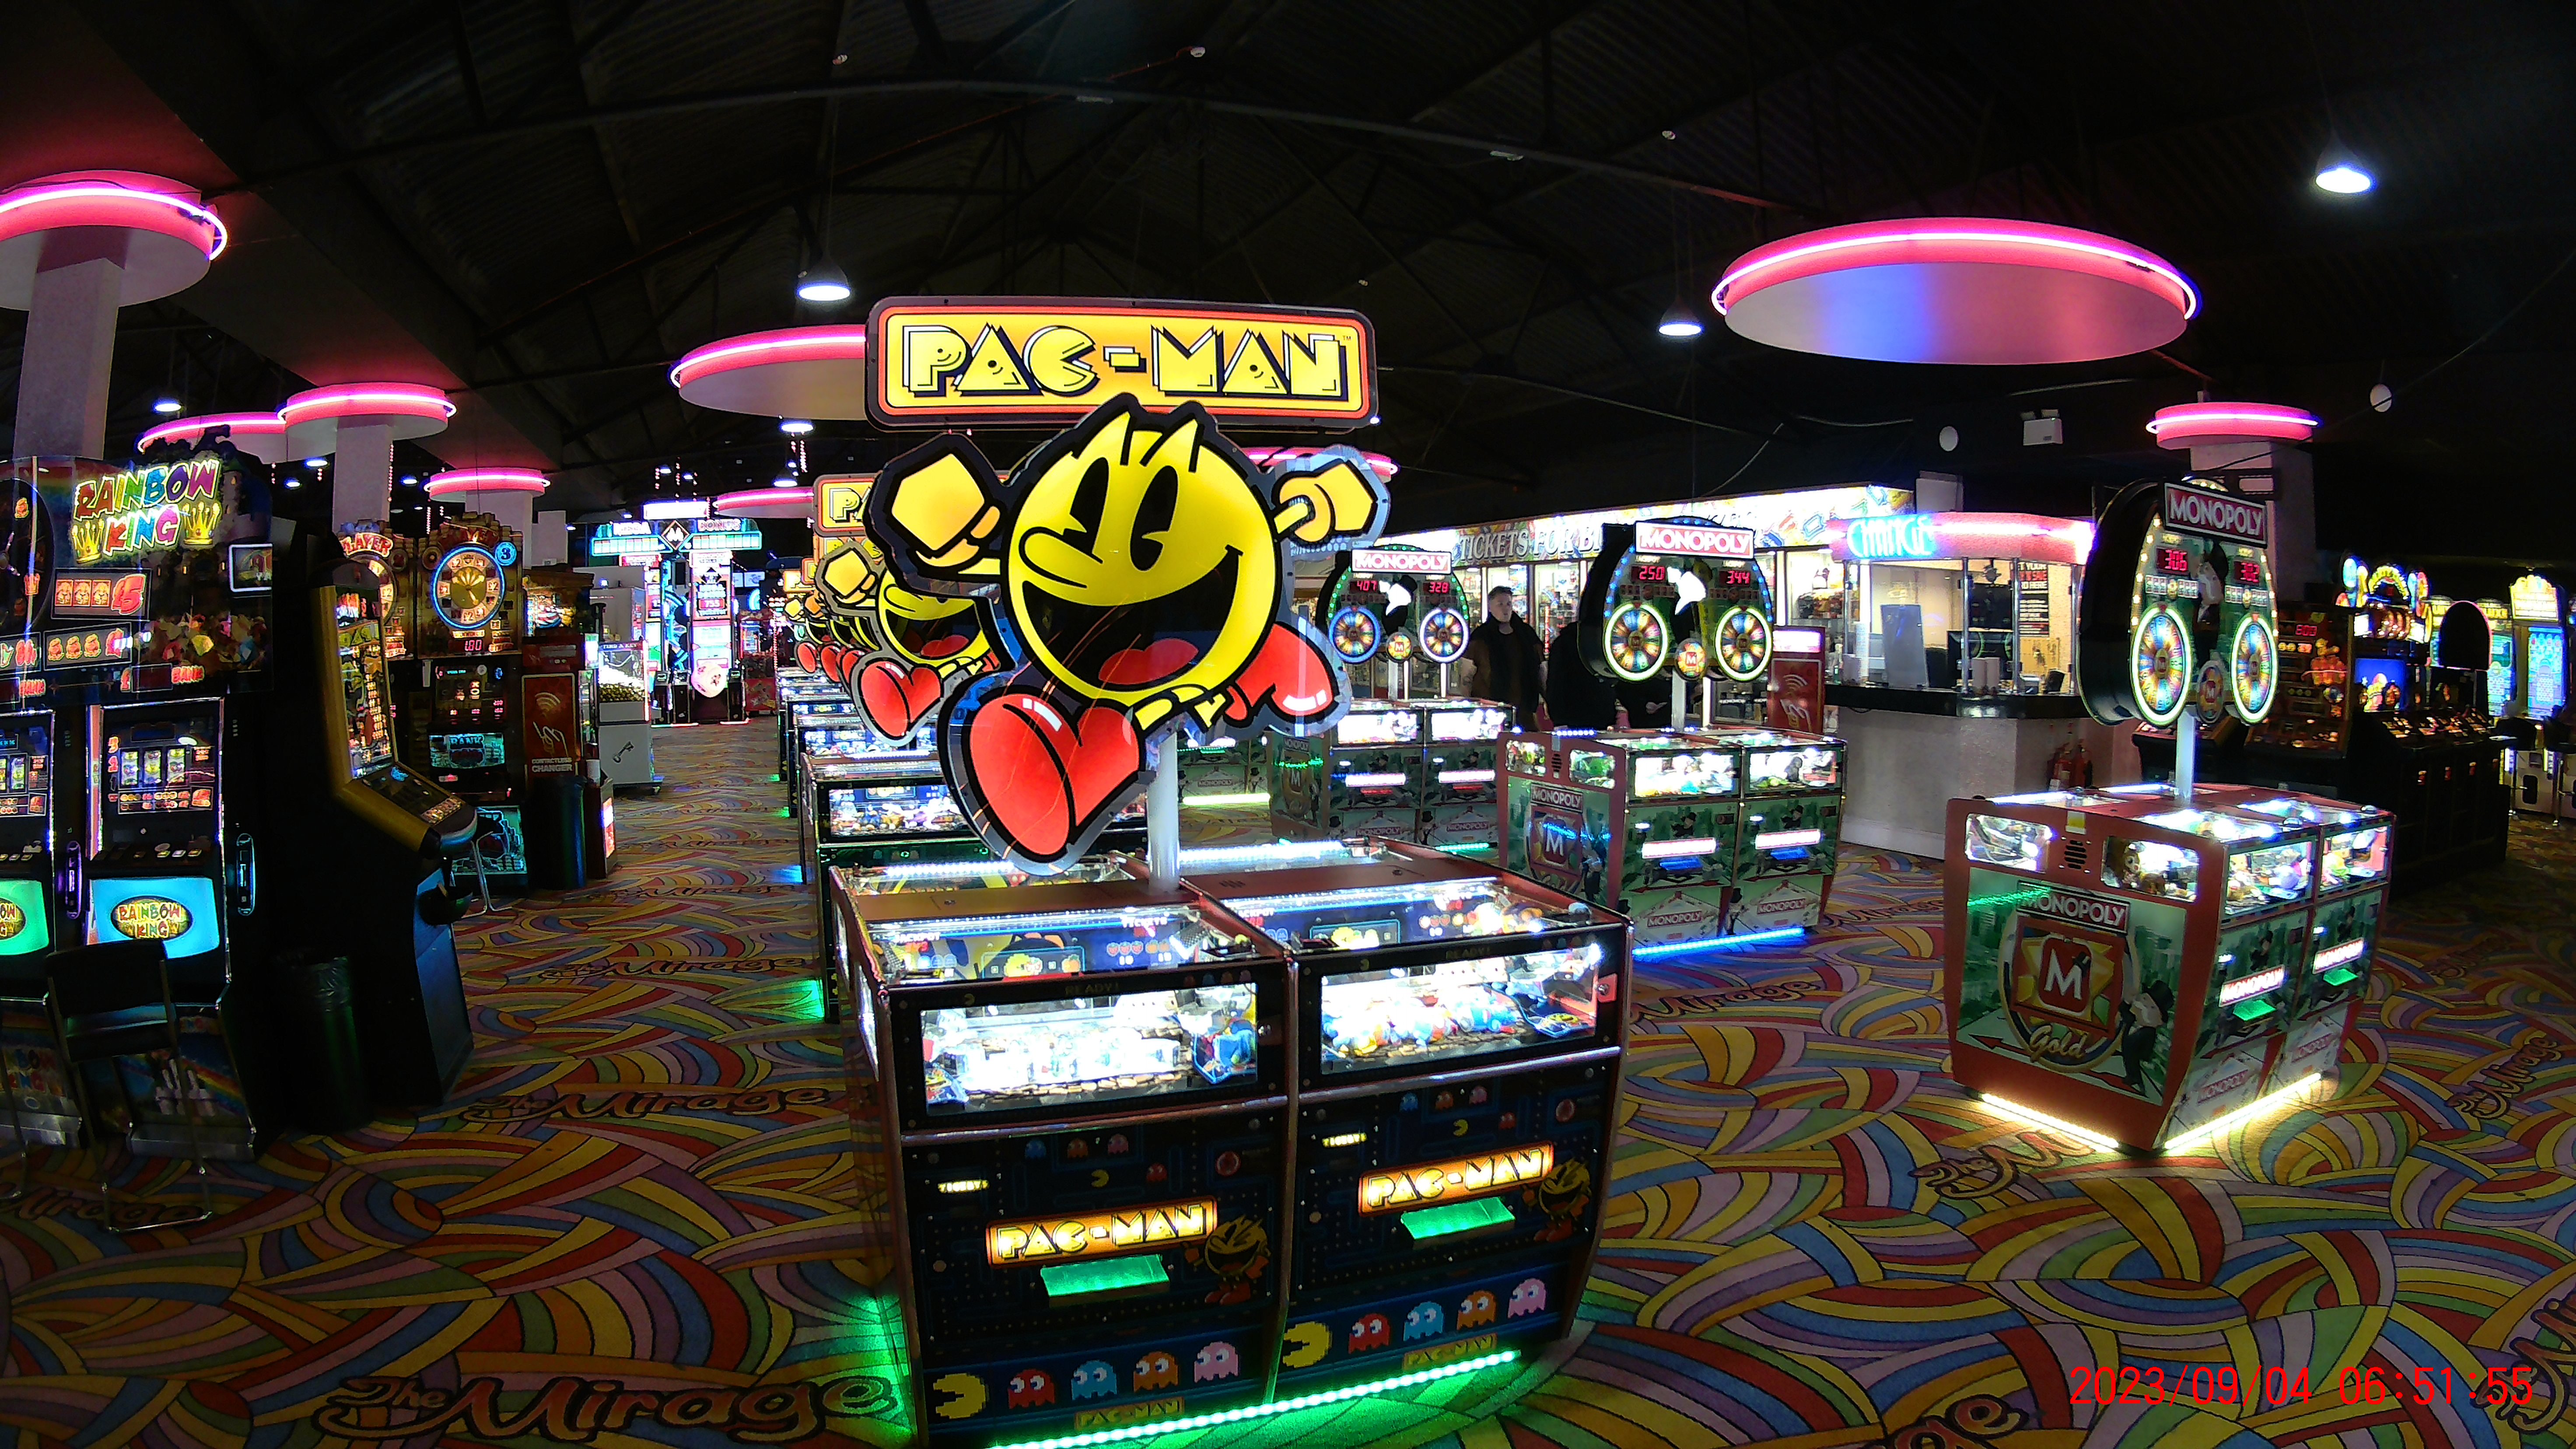 Photo of an arcade taken with the daytime camera on the SJCAM SJ20 action camera